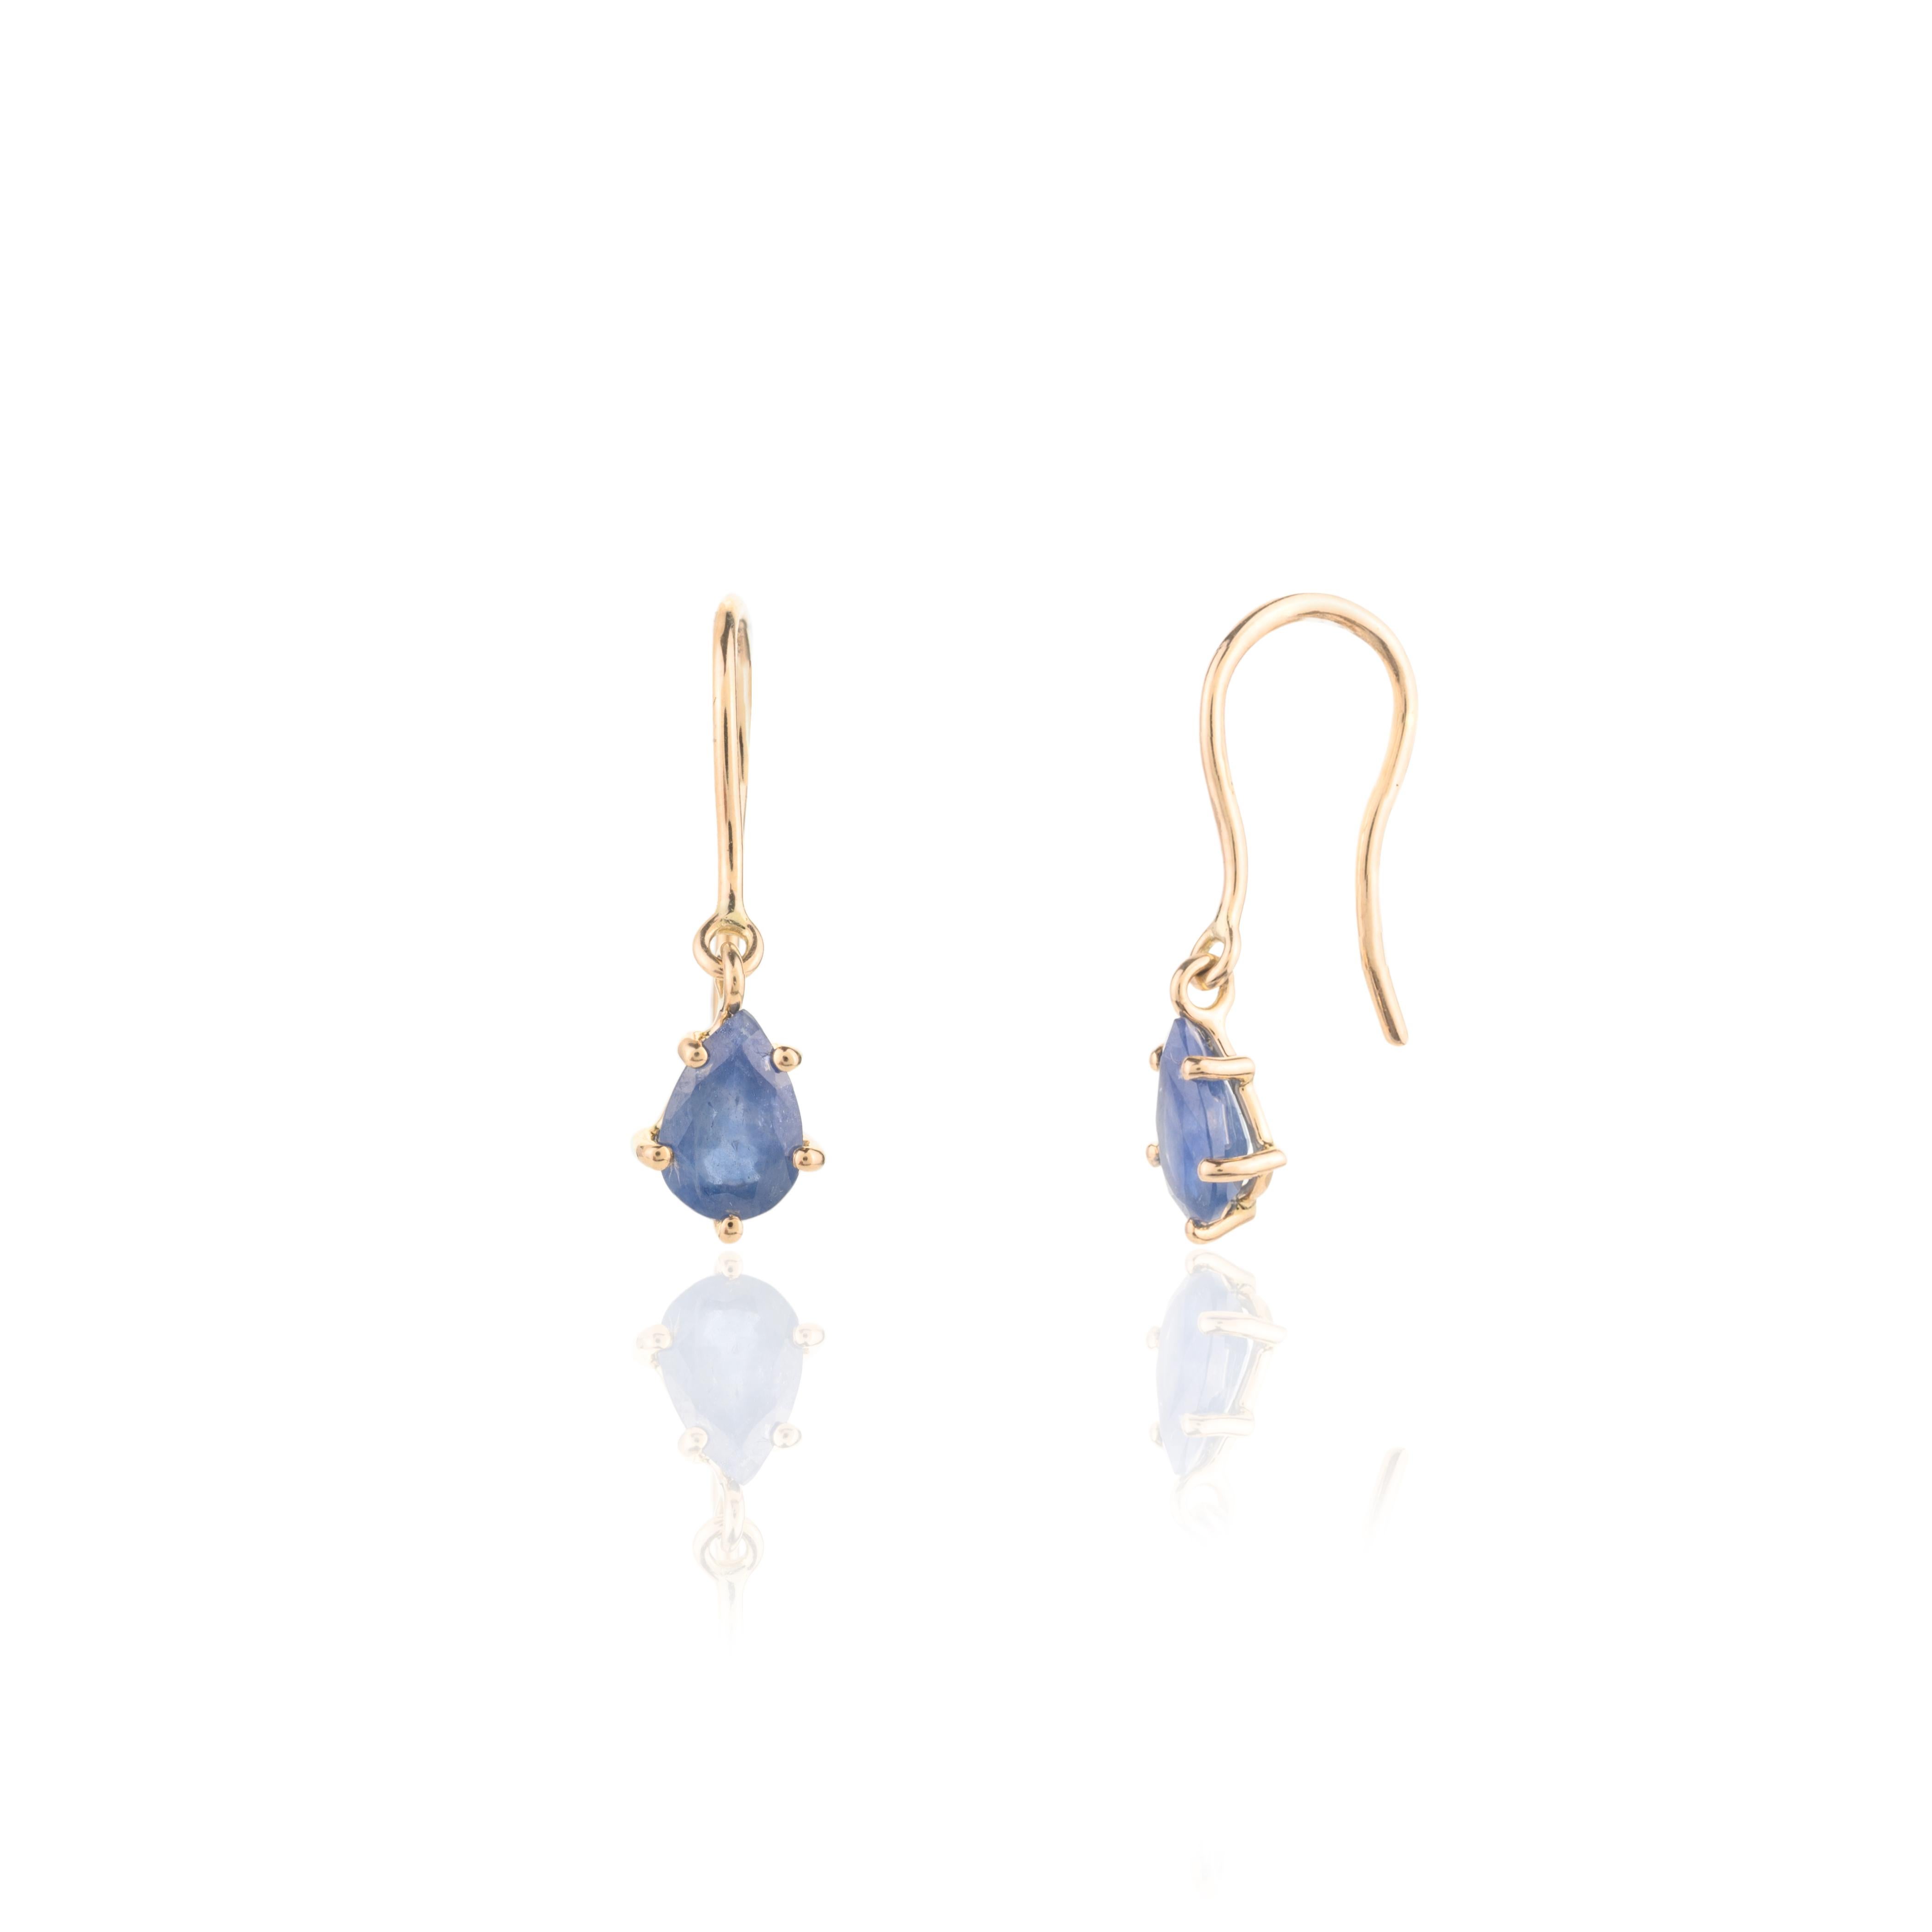 Women's 14k Solid Yellow Gold Minimalist Pear Cut Sapphire Dangle Earrings Gift for Her For Sale